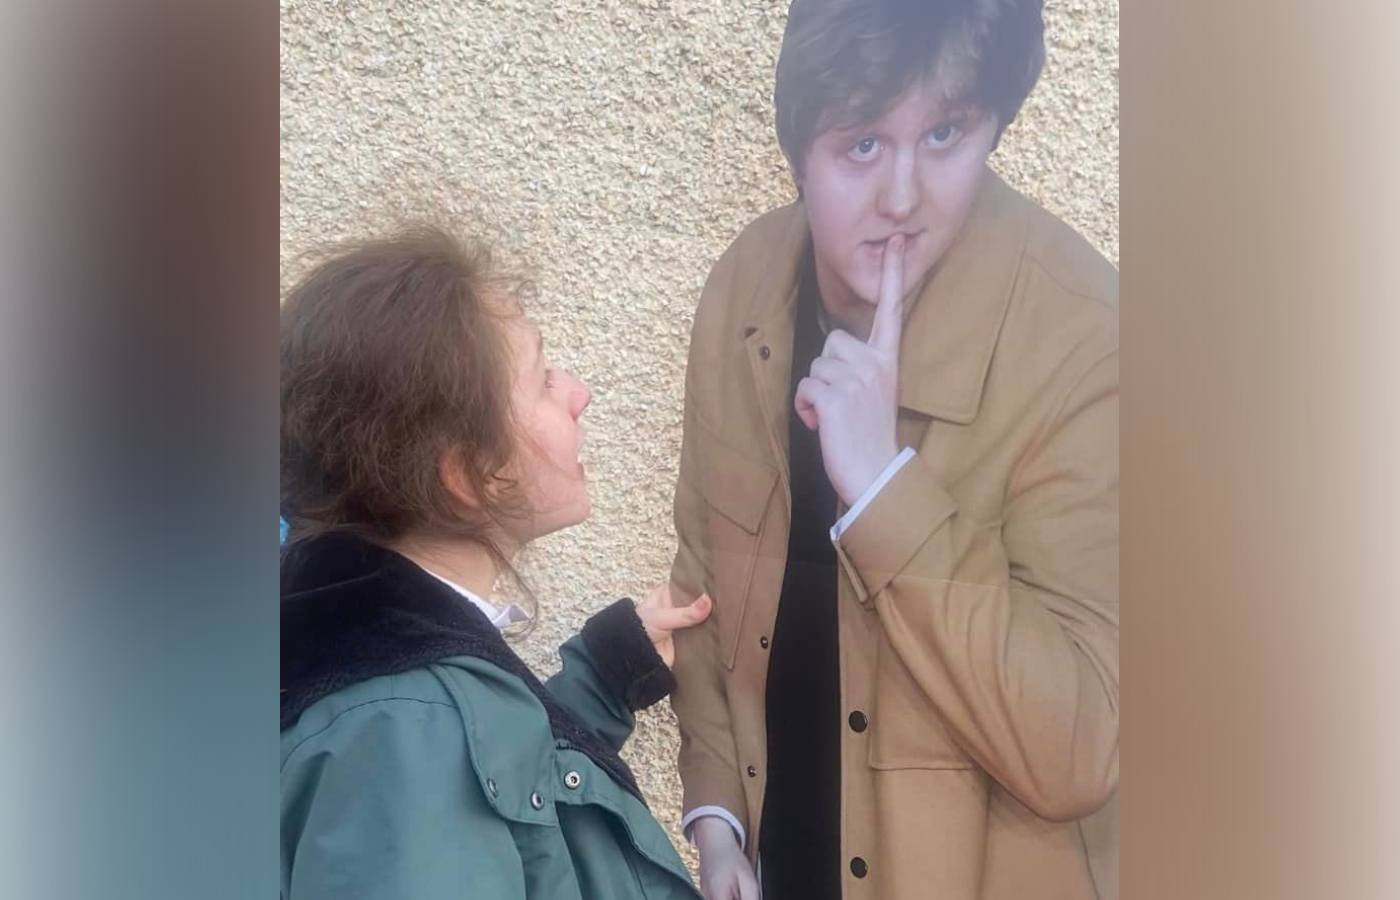 Erin was surprised with a cardboard cut out for Lewis Capaldi in the garden.